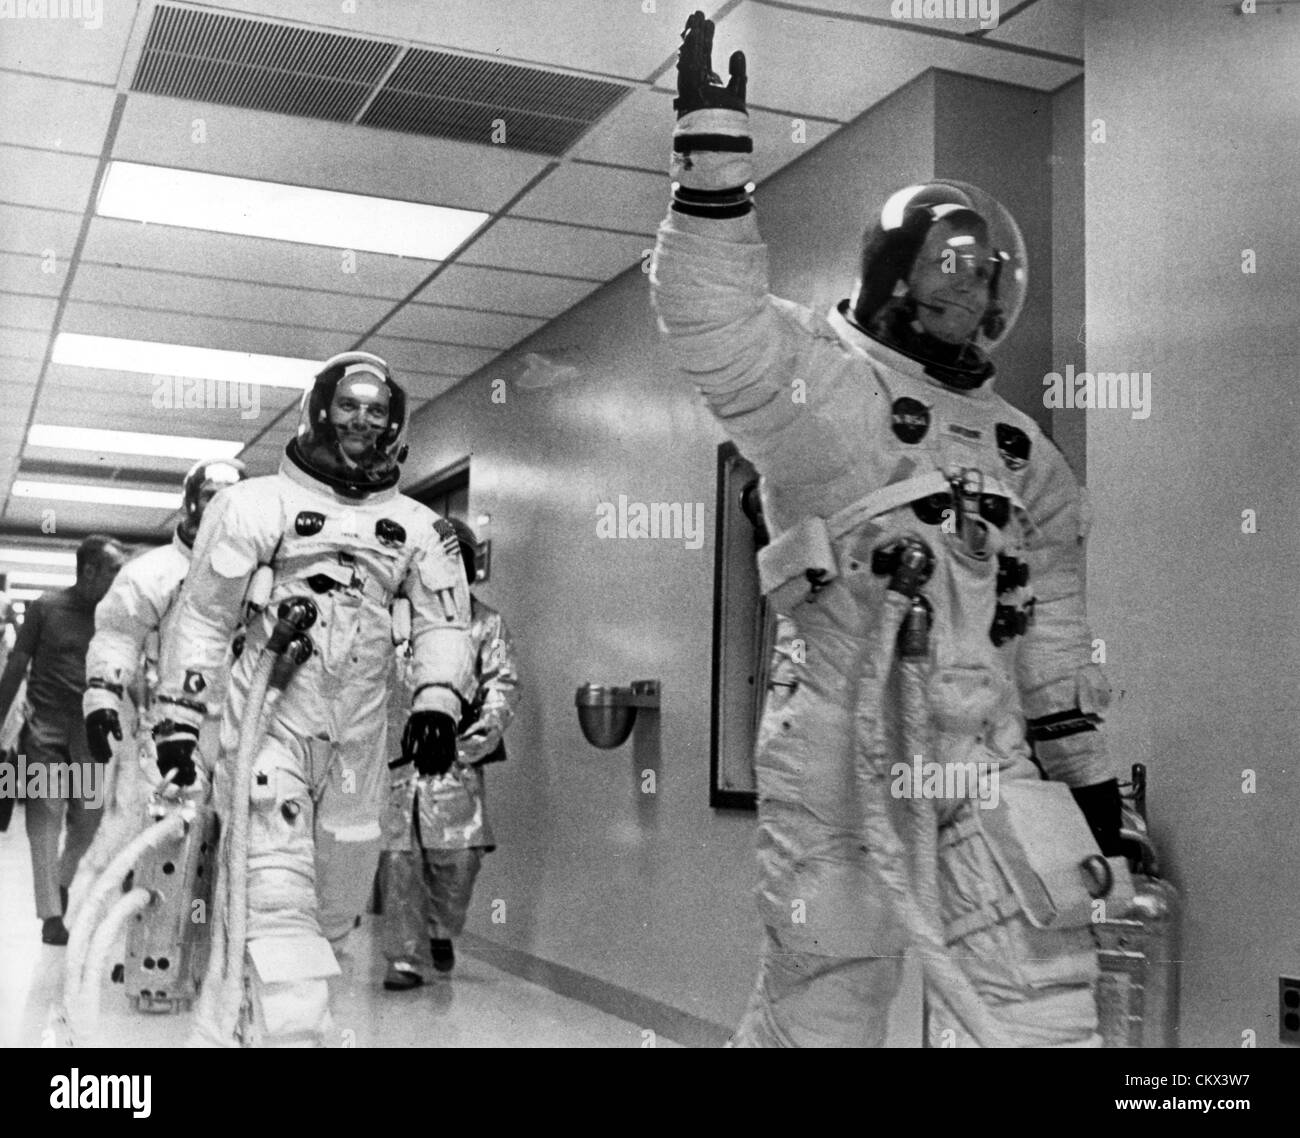 June 7, 1969 - Merritt Island, FL, U.S. - The Crew Members of Apollo 11 seen as they leave the Space Center ready to head to the moon, led by NEIL ARMSTRONG, EDWIN ''BUZZ'' ALDRIN, and MICHAEL COLLINS. (Credit Image: © KEYSTONE Pictures USA/ZUMAPRESS.com) Stock Photo